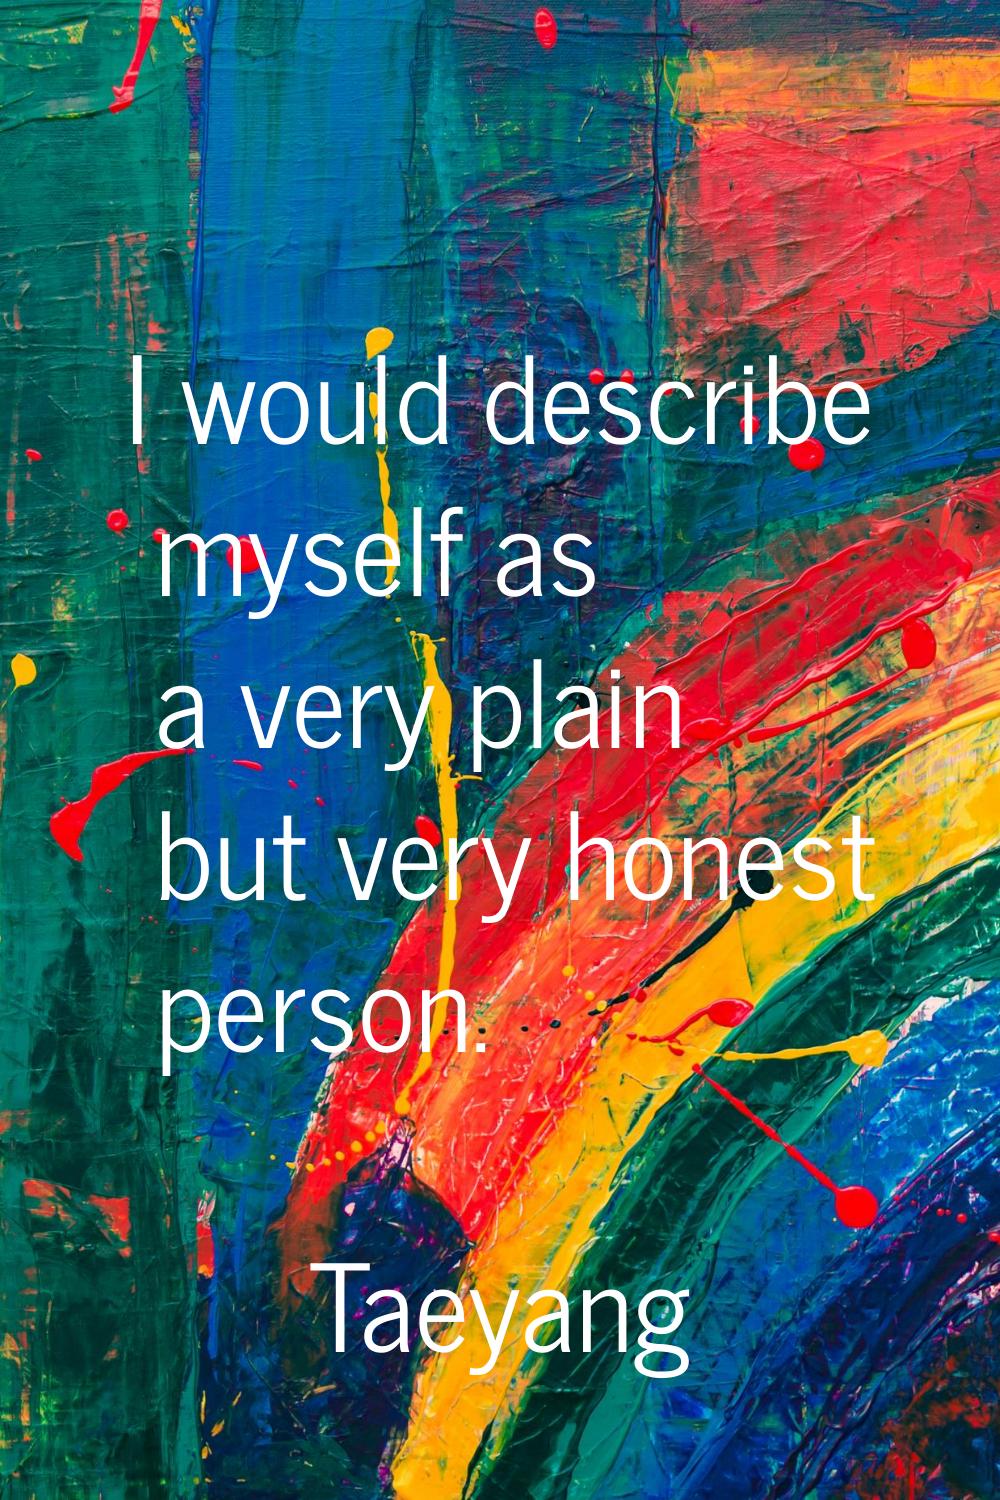 I would describe myself as a very plain but very honest person.